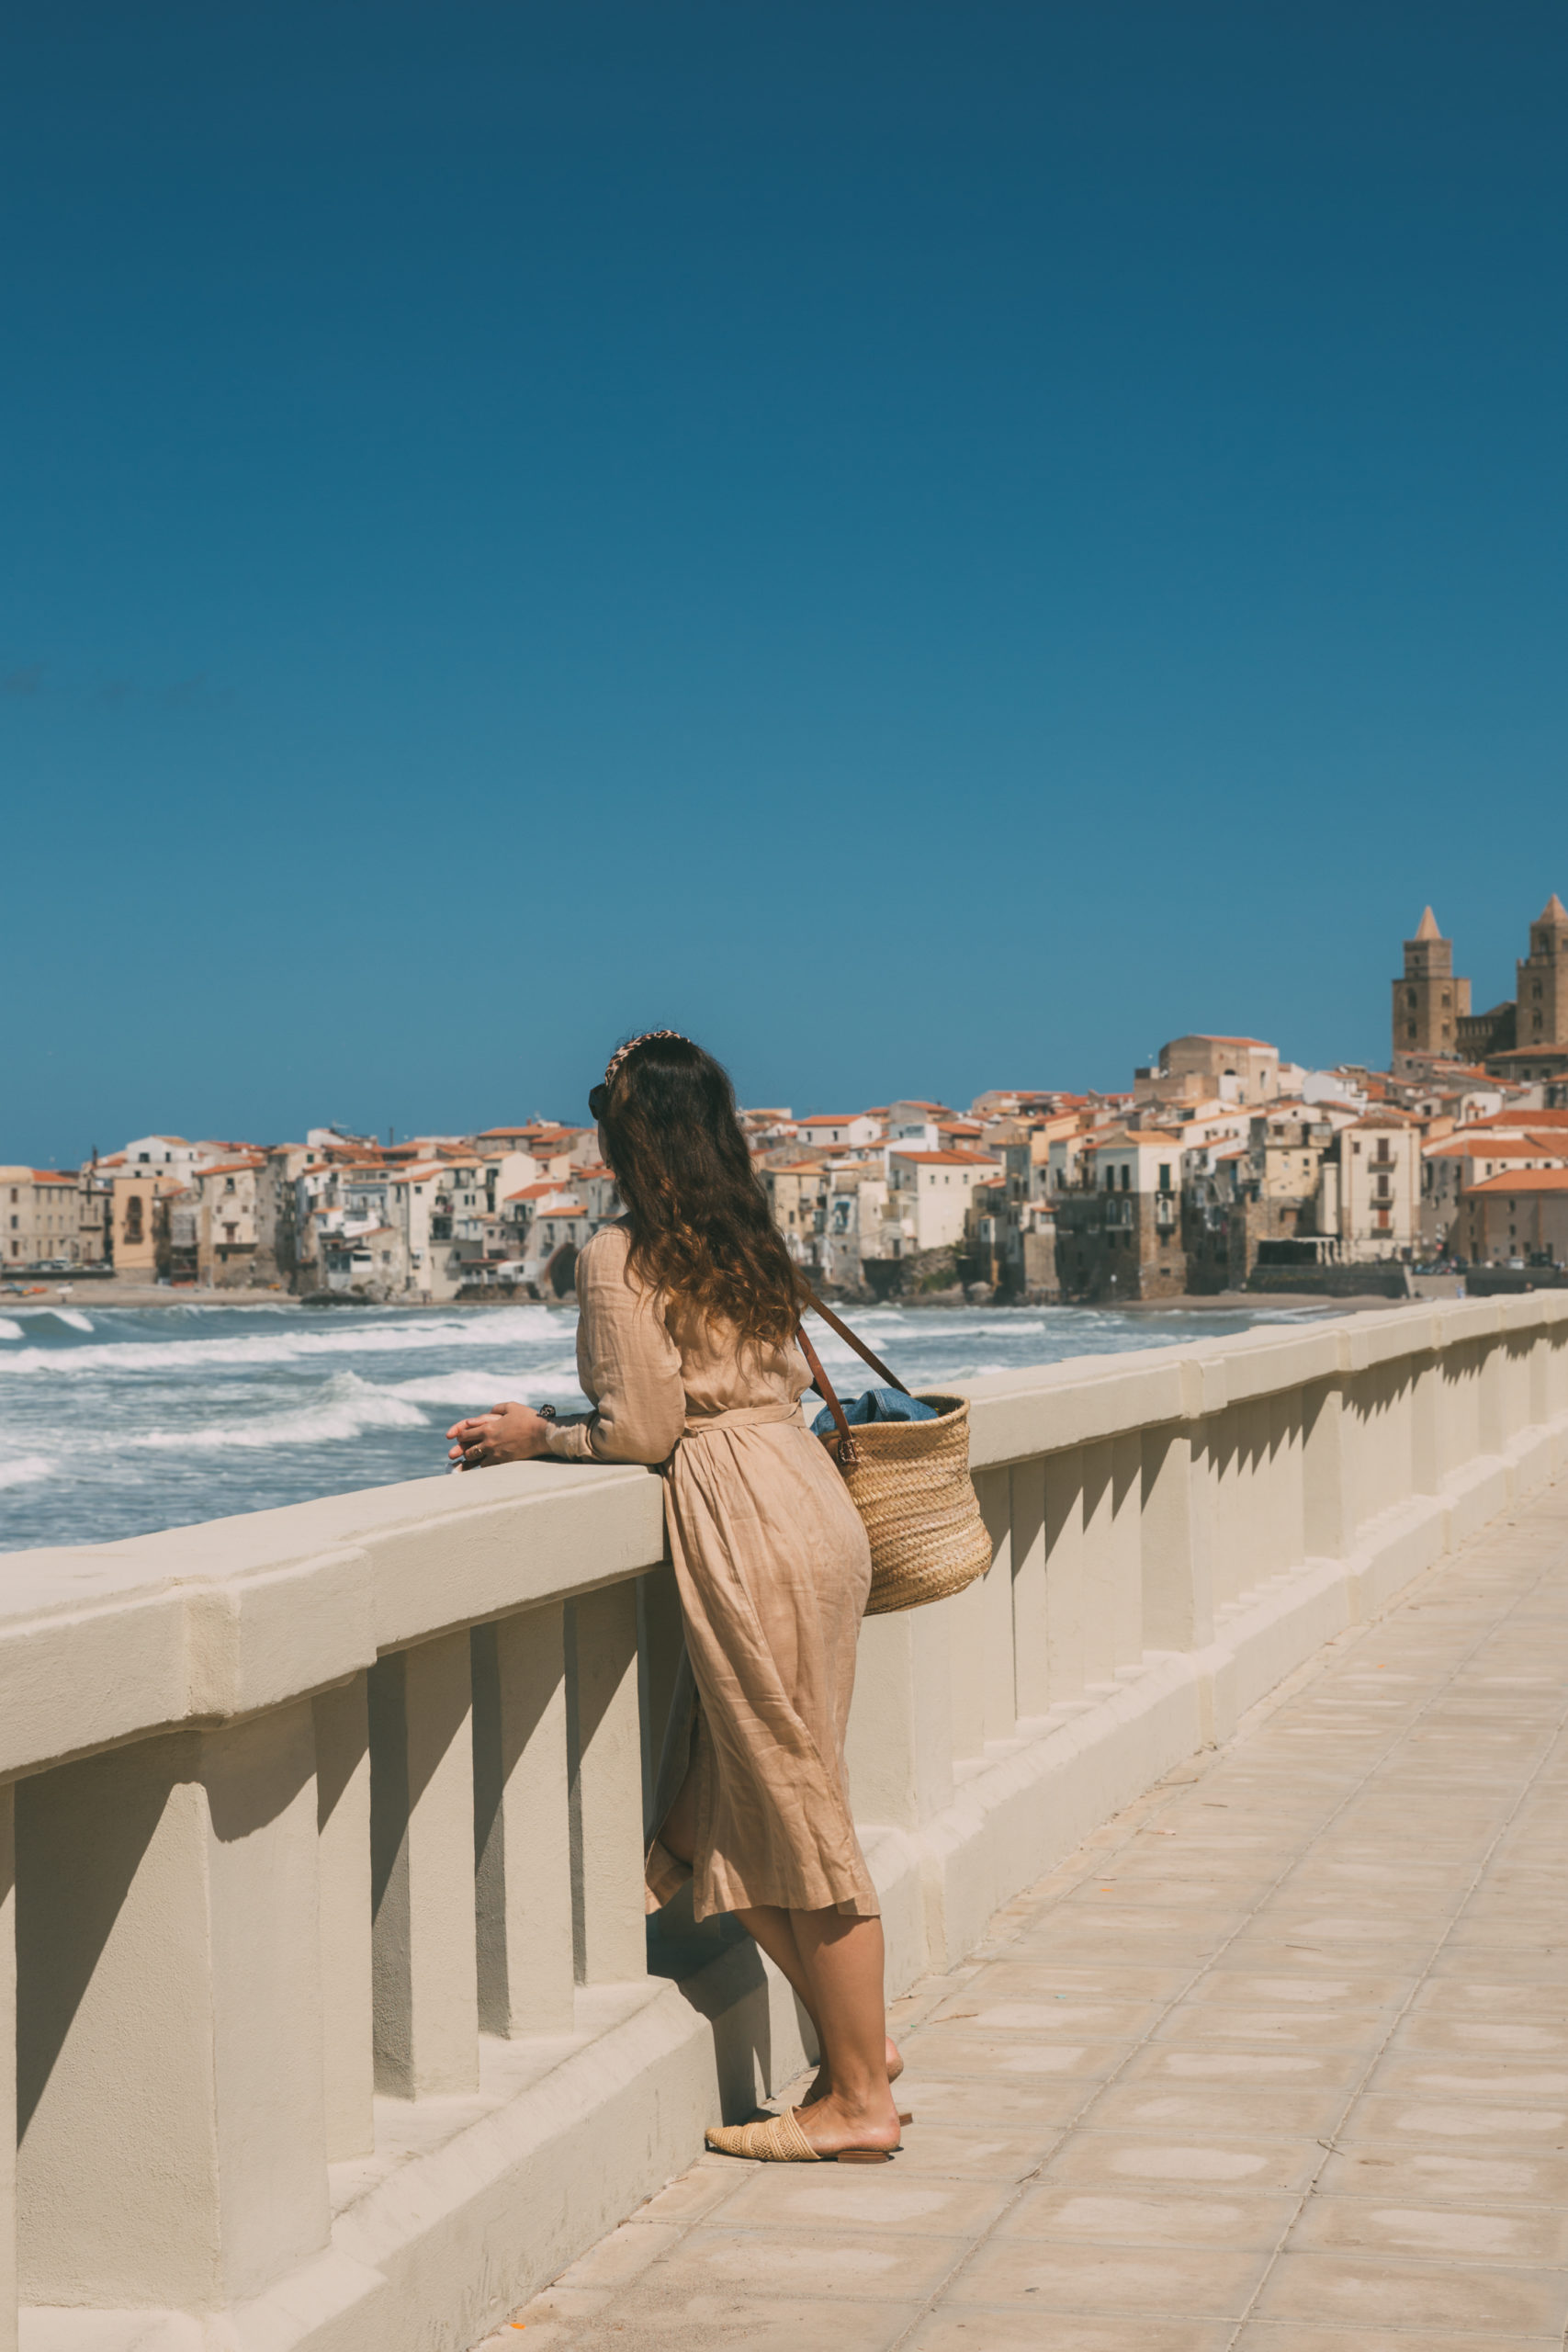 3 days in Cefalù: what to see, do and eat